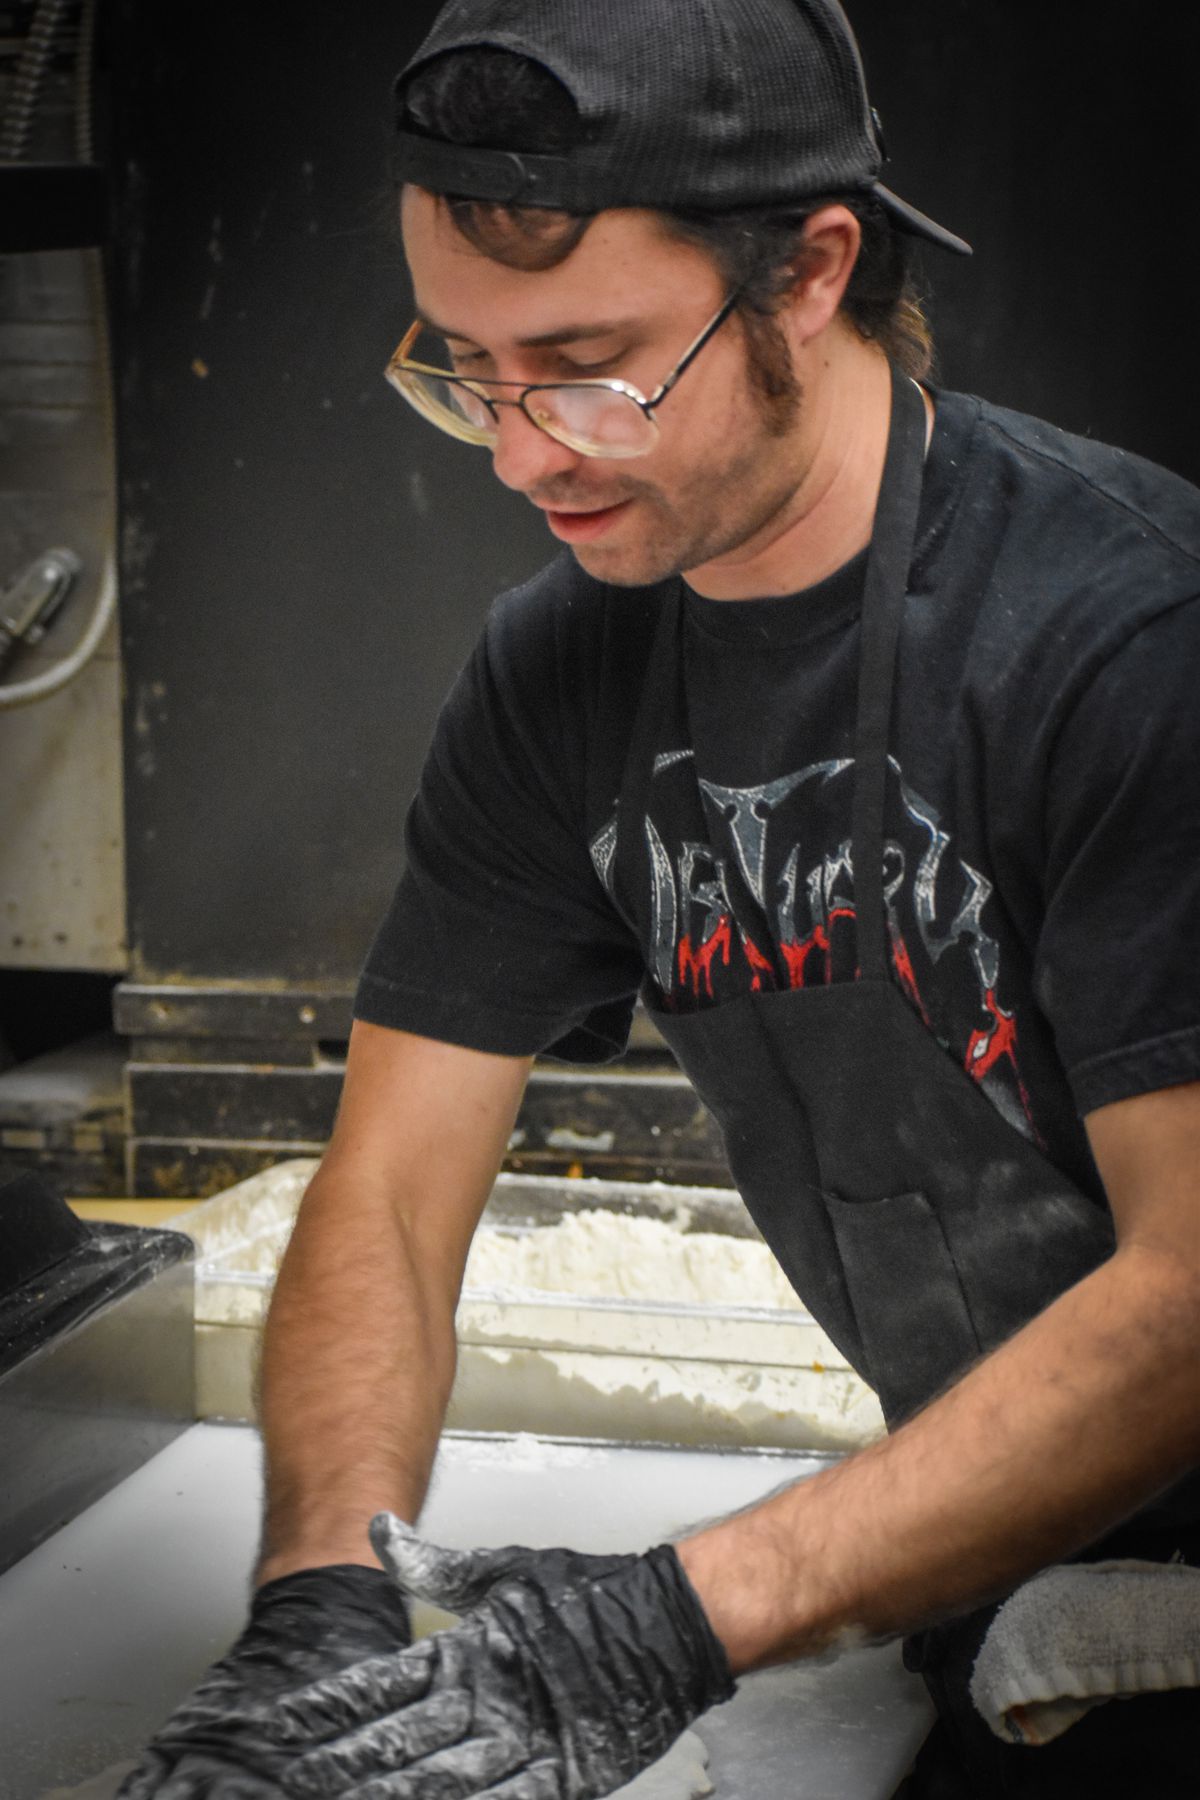 A chef in a black hat and black t-shirt makes pizza at 4th Horsemen.